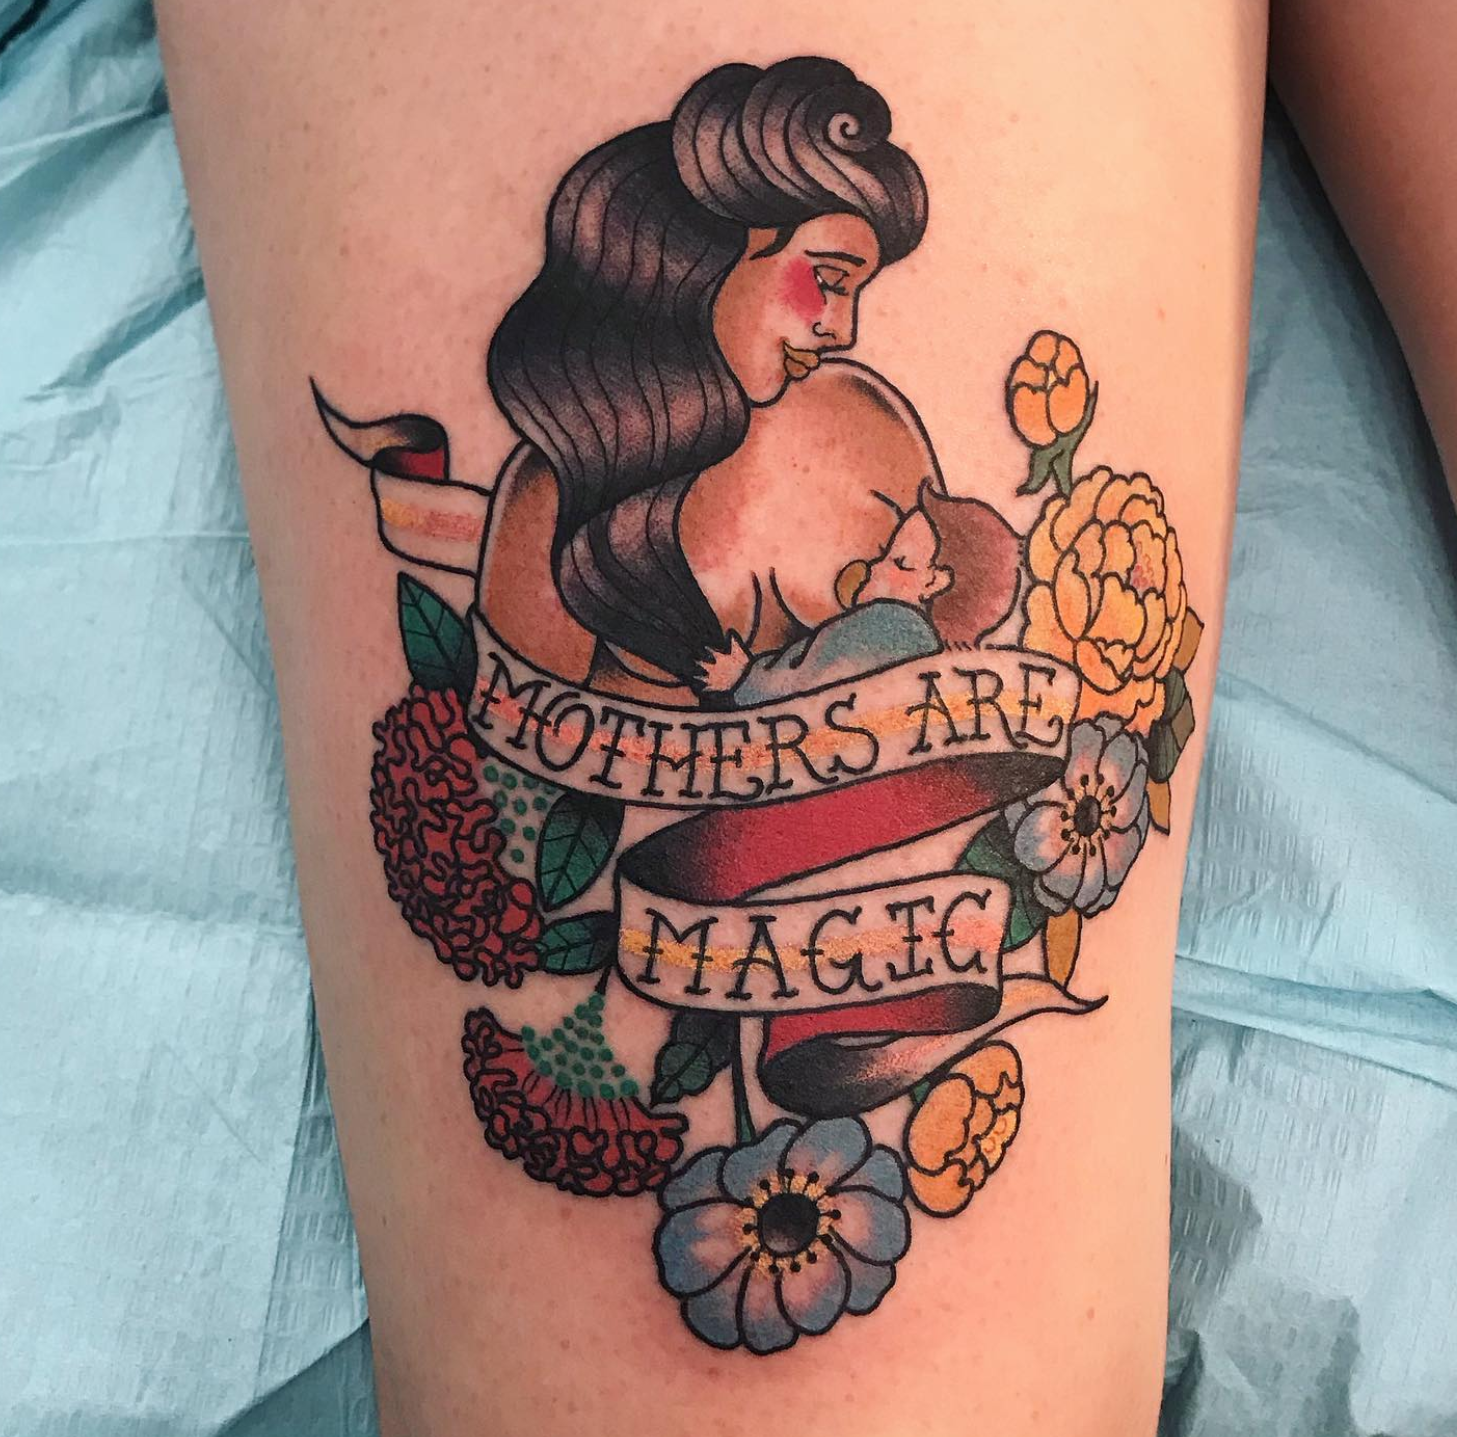 The 10 most painful places to get inked according to a tattoo artist   Daily Star